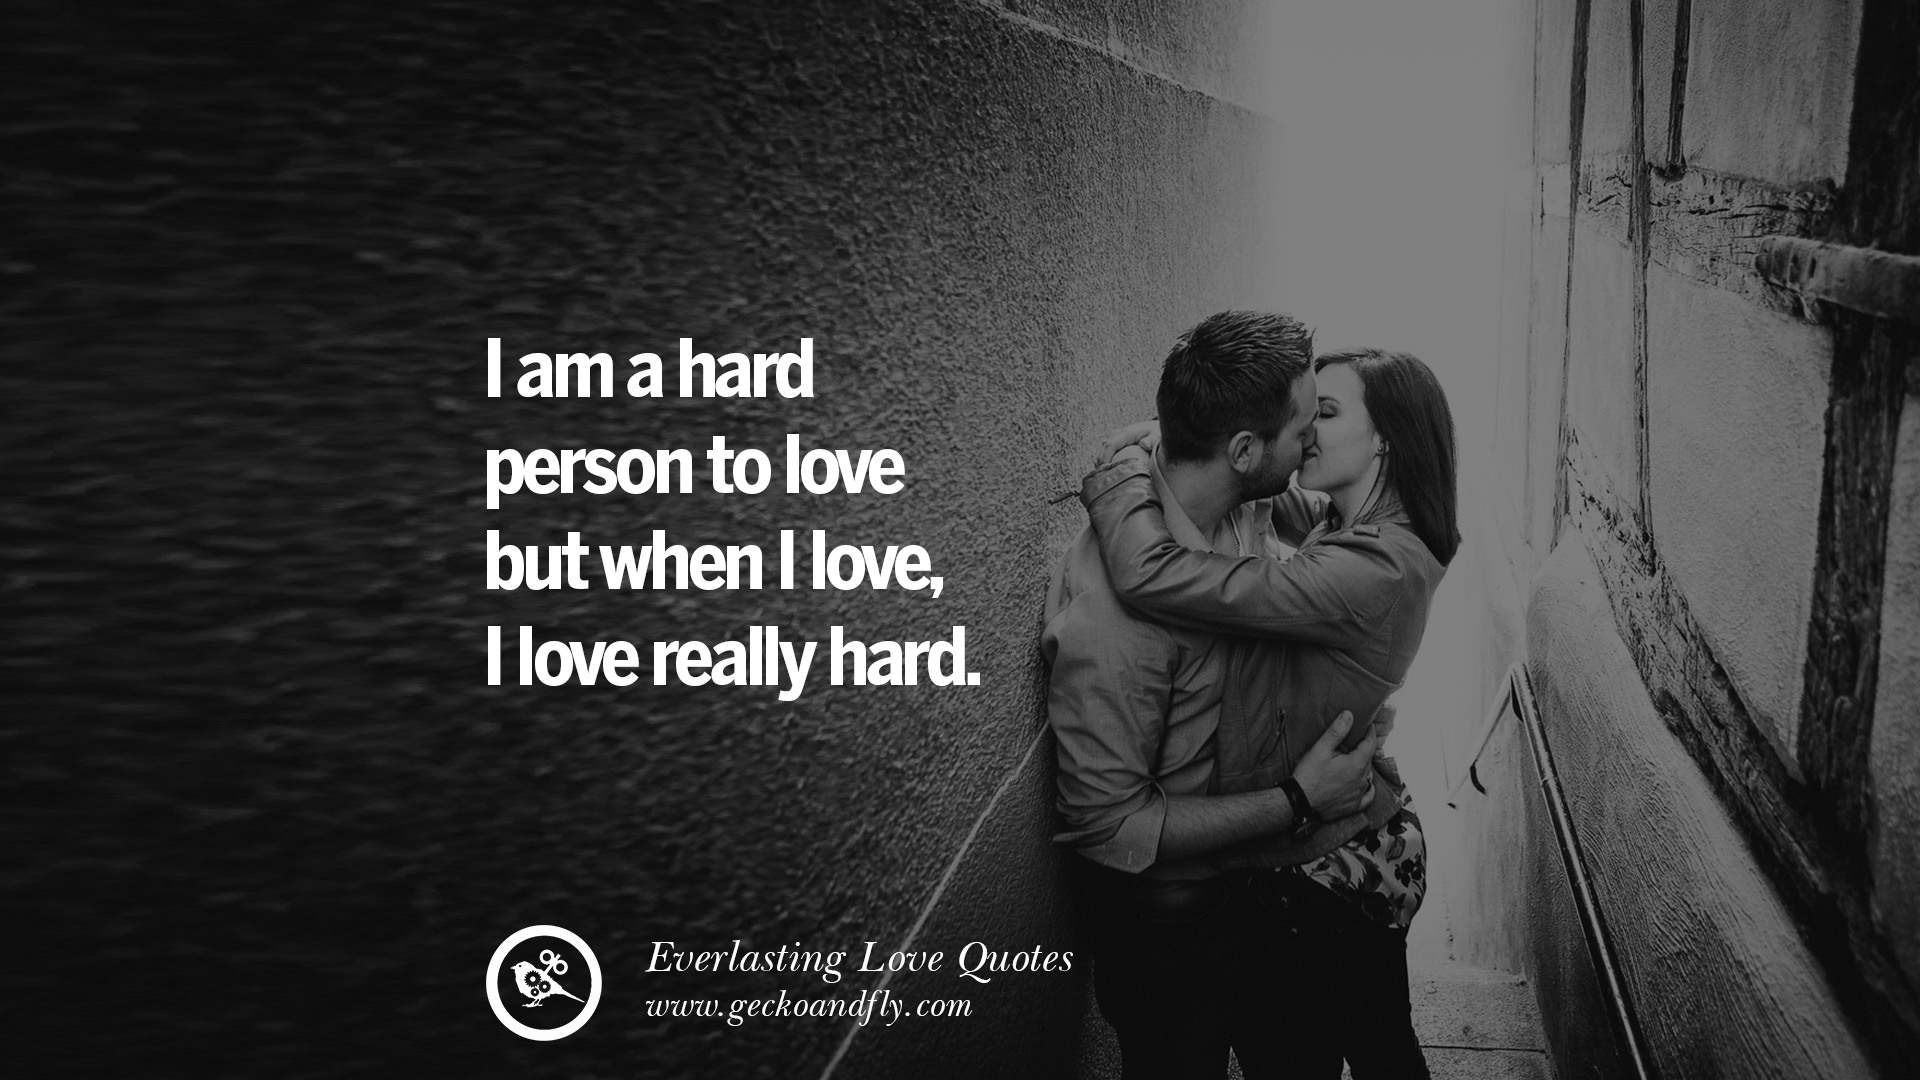 I am a hard person to love but when I love I love really hard